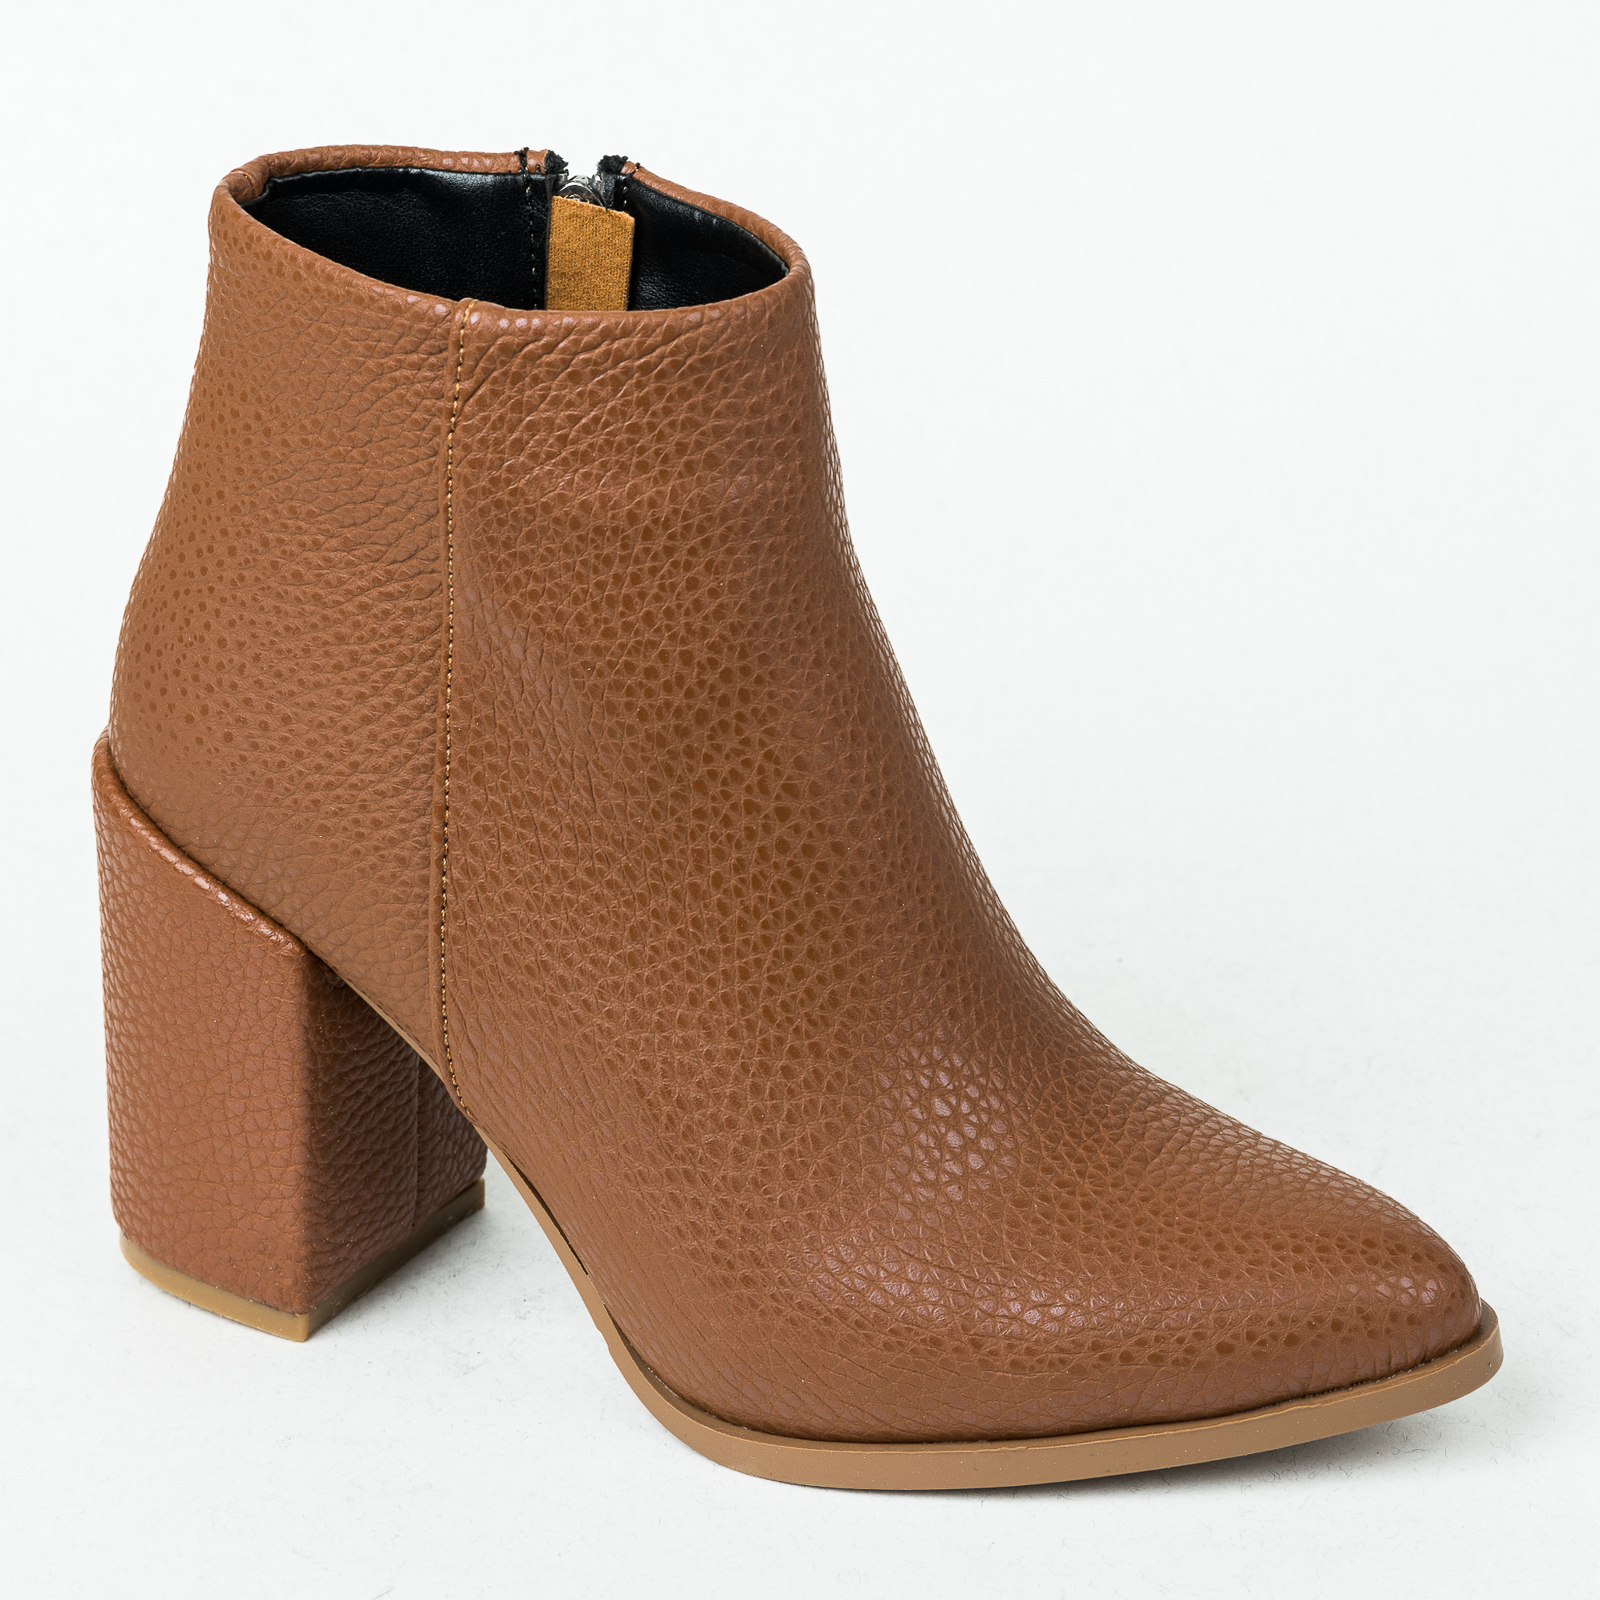 Women ankle boots B164 - CAMEL